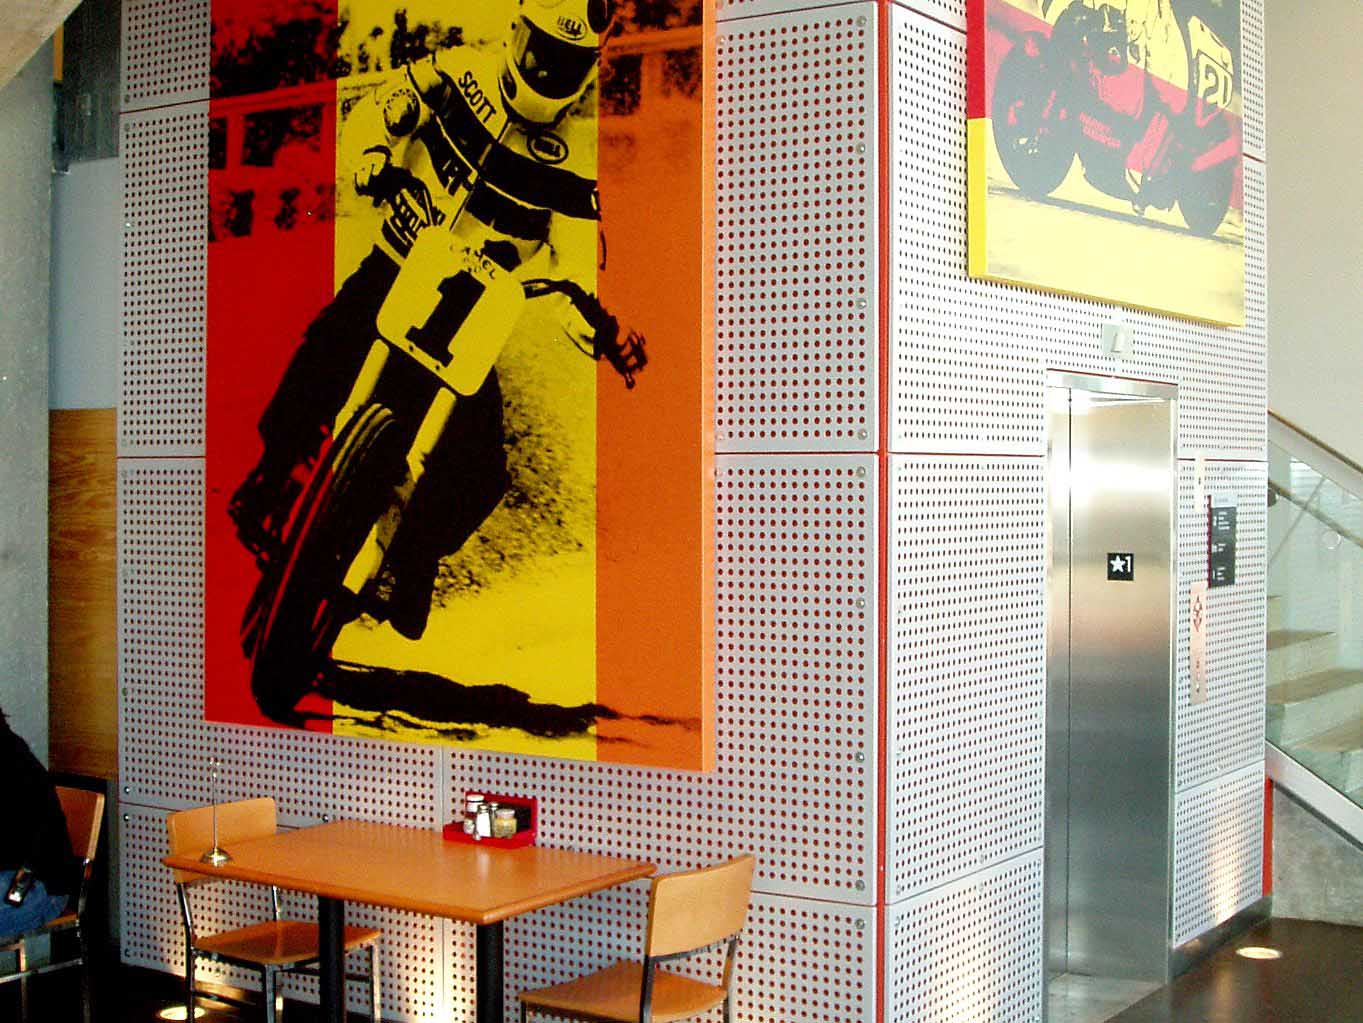 Perforated Metal decoration inside the Harley-Davidson Museum.